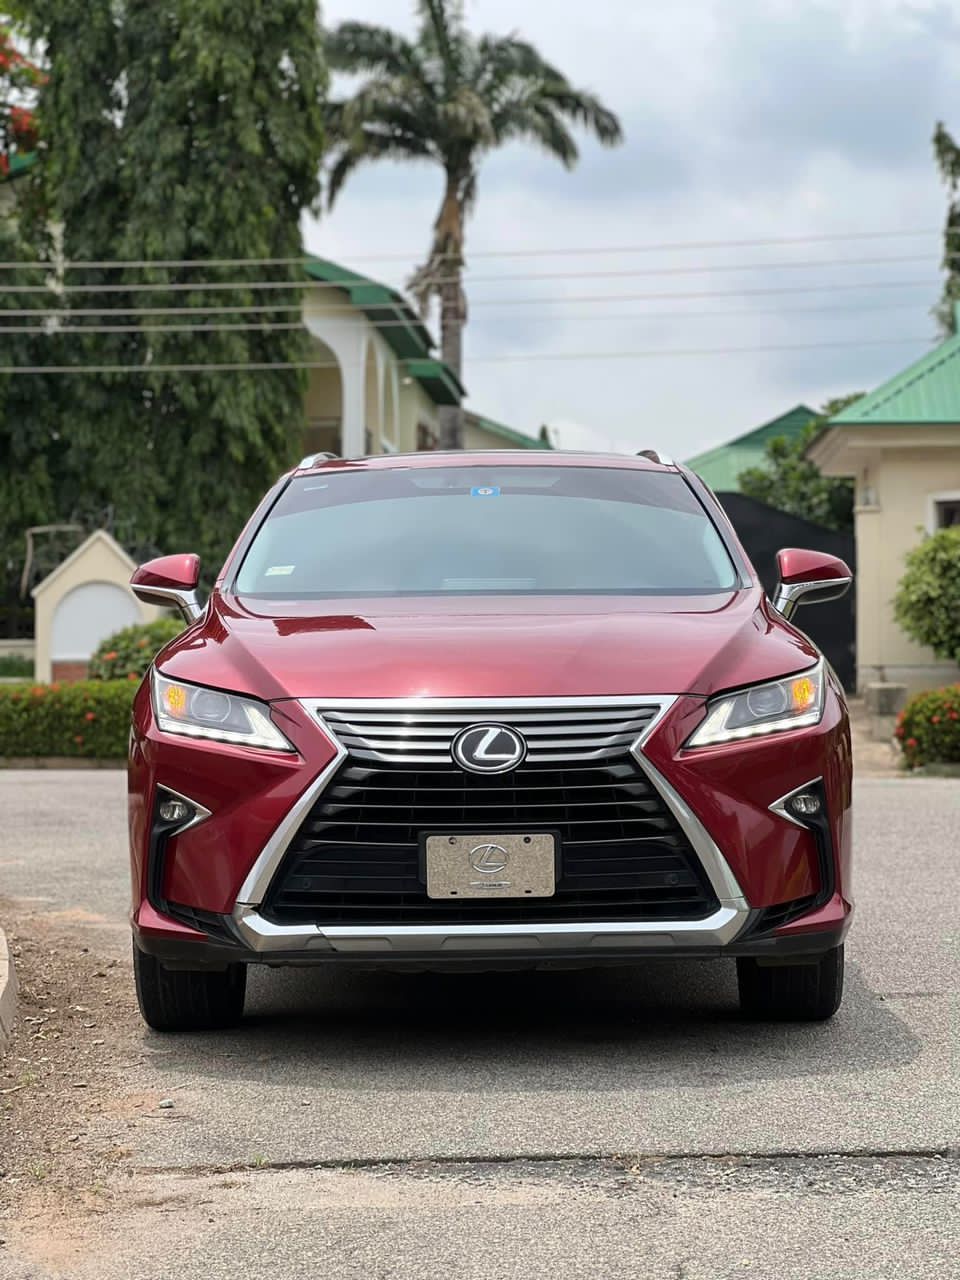 2016 Rx350 red leather dye is coming off - ClubLexus - Lexus Forum  Discussion